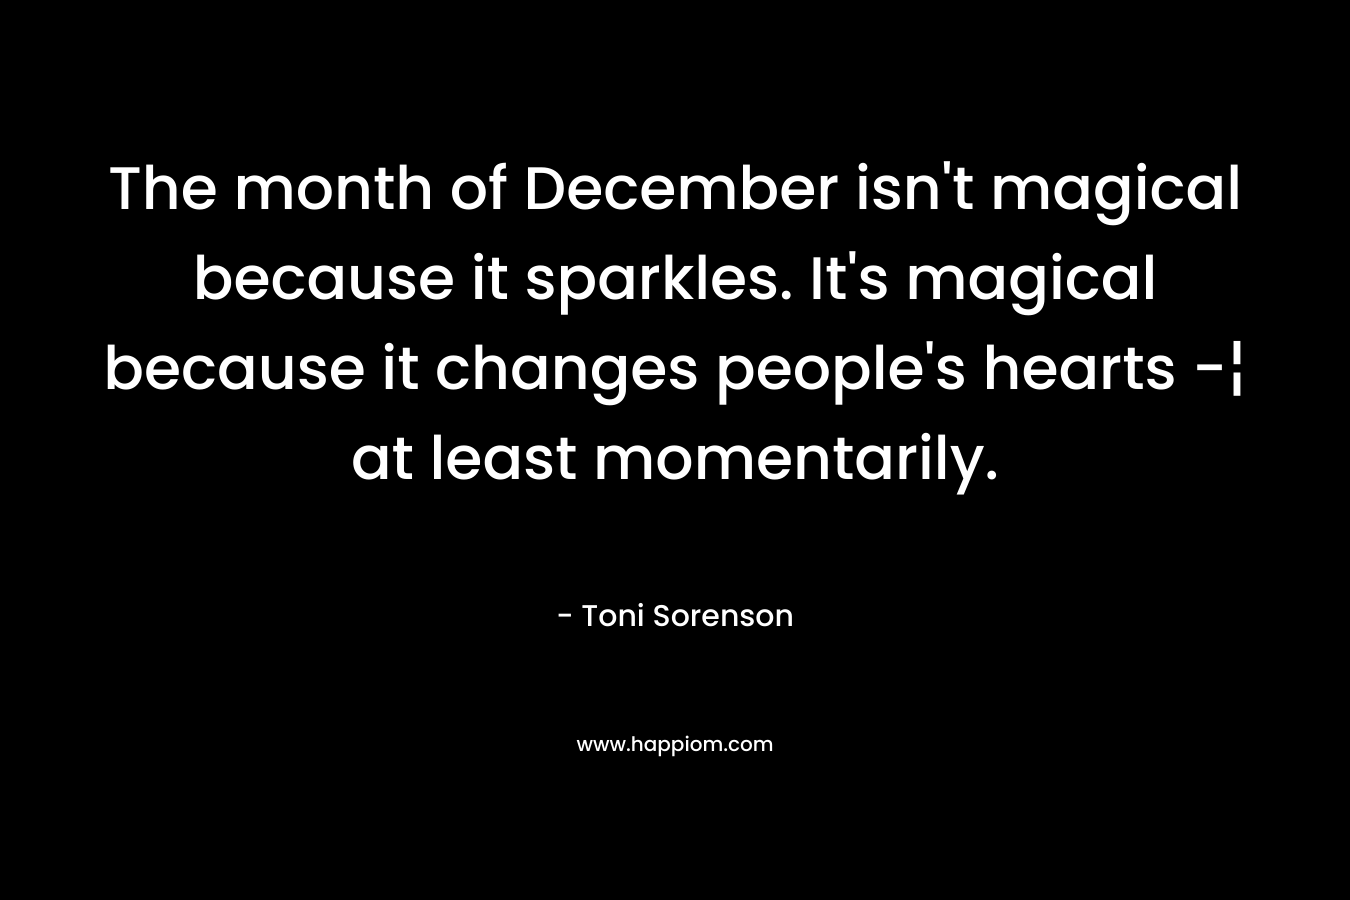 The month of December isn't magical because it sparkles. It's magical because it changes people's hearts -¦ at least momentarily.